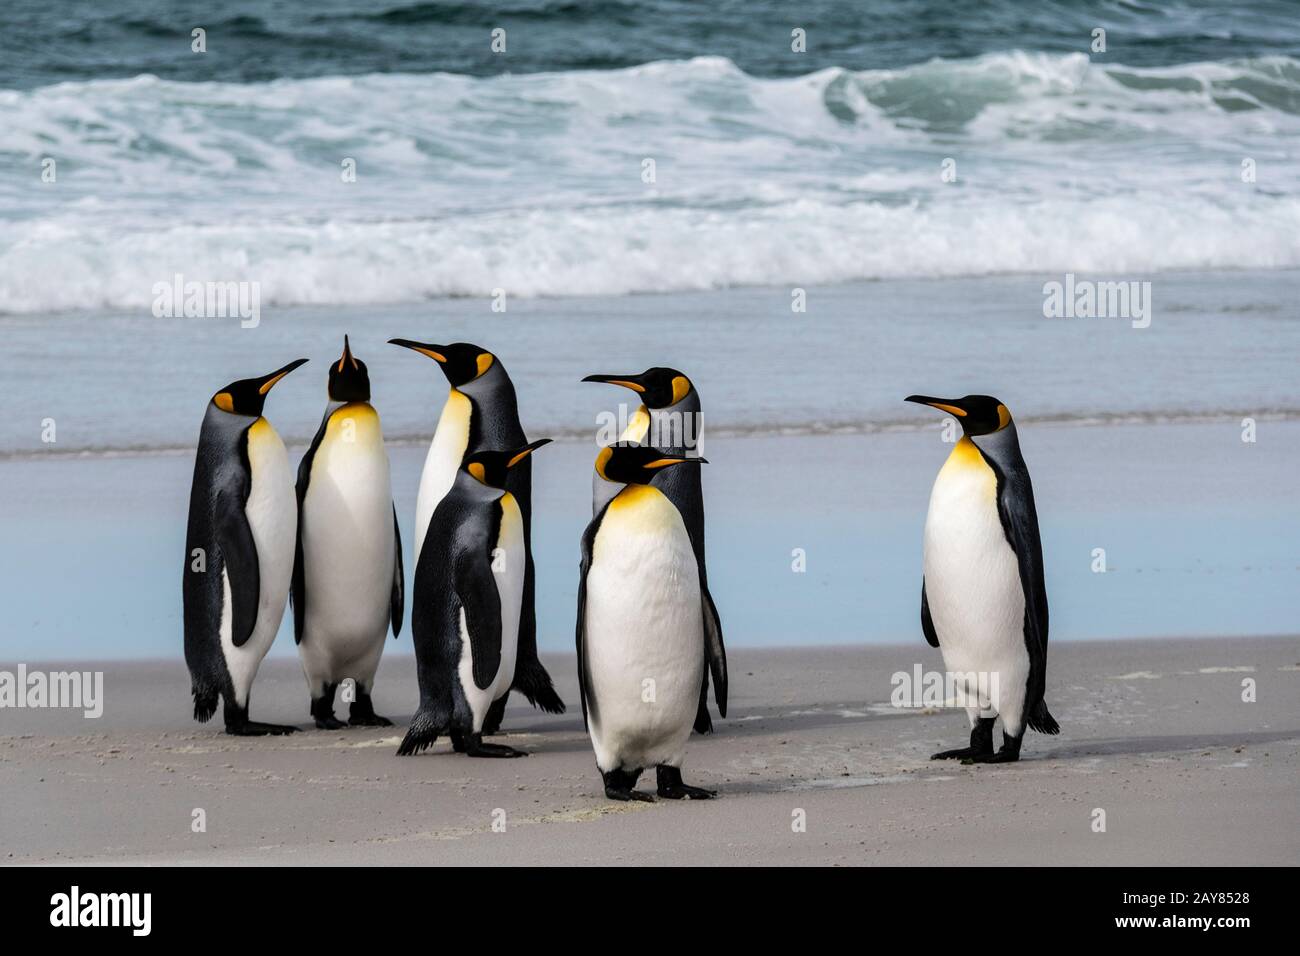 Group of King Penguins, Aptenodytes patagonicus, on the beach at the Neck, Saunders Island, Falkland Islands, British Overseas Territory Stock Photo